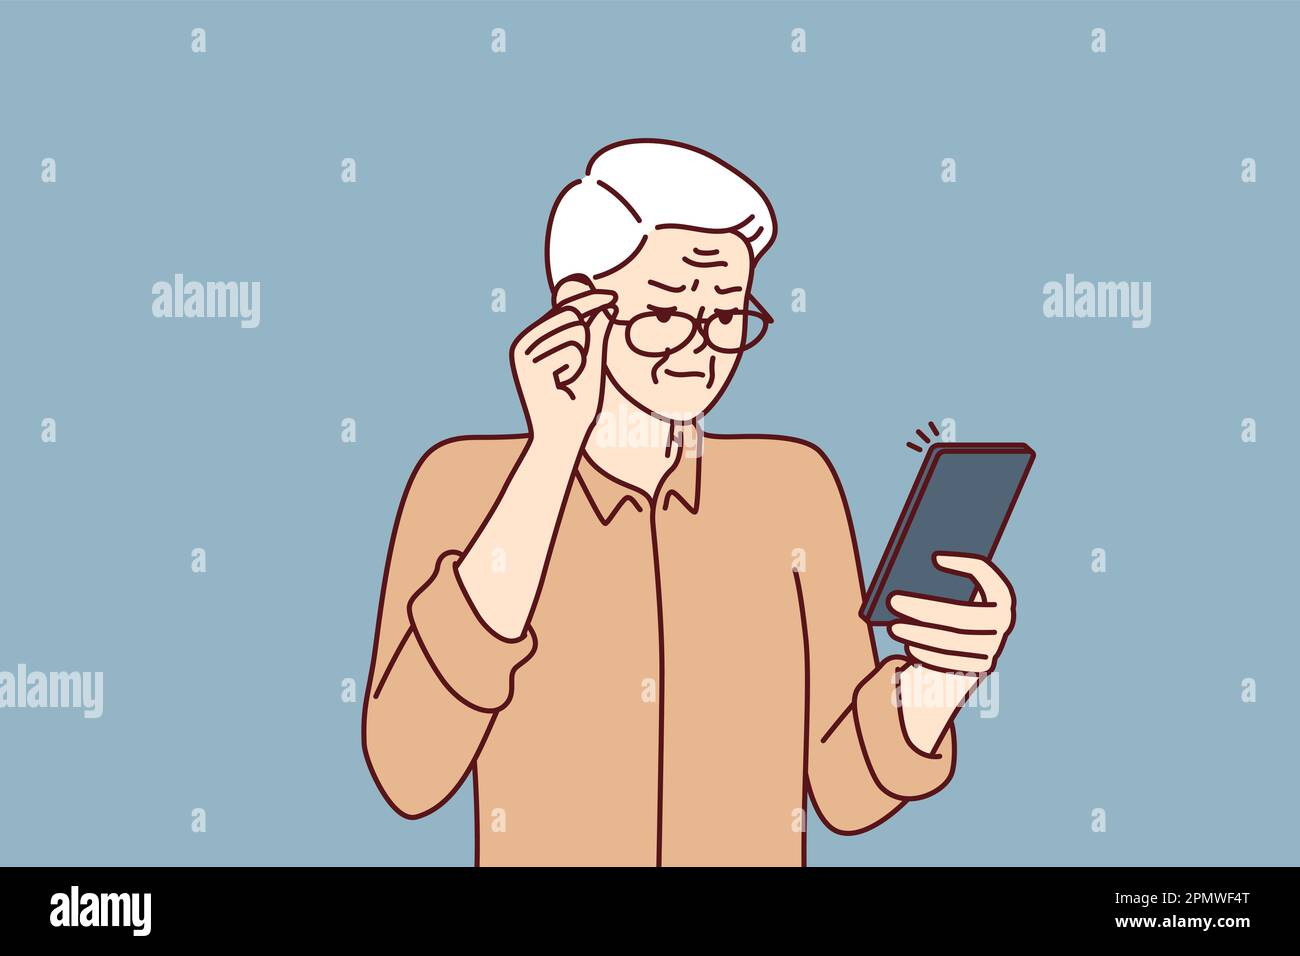 Elderly man with poor eyesight squint looking at screen of mobile phone to read SMS. Grandpa is having vision problems due to cataracts in eyes and needs help of ophthalmologist doctor  Stock Vector